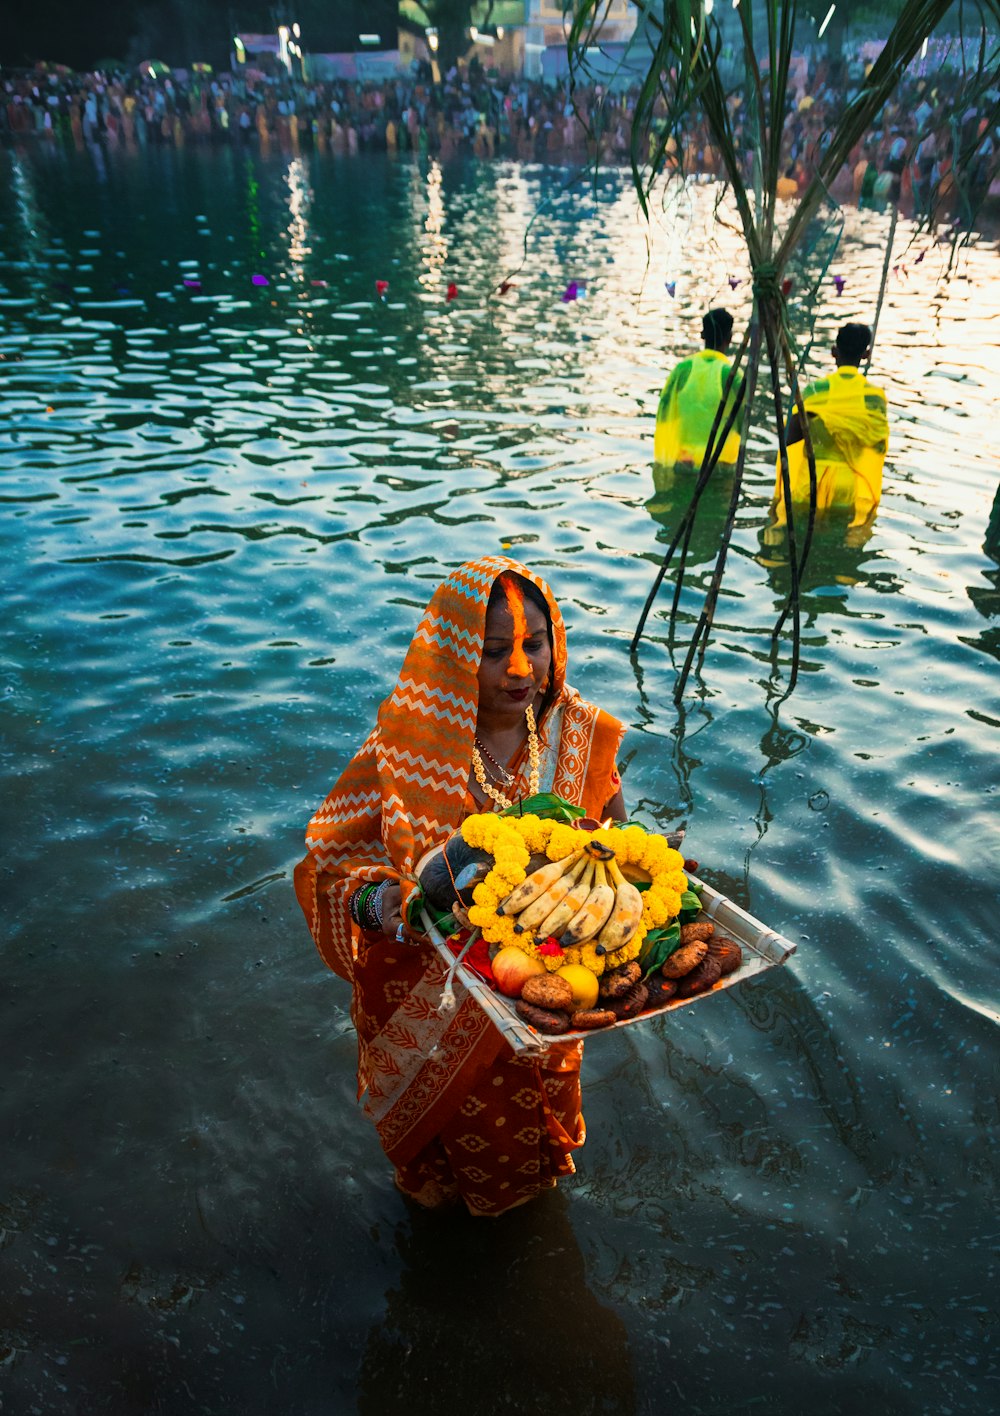 a woman standing in a body of water holding a basket of fruit